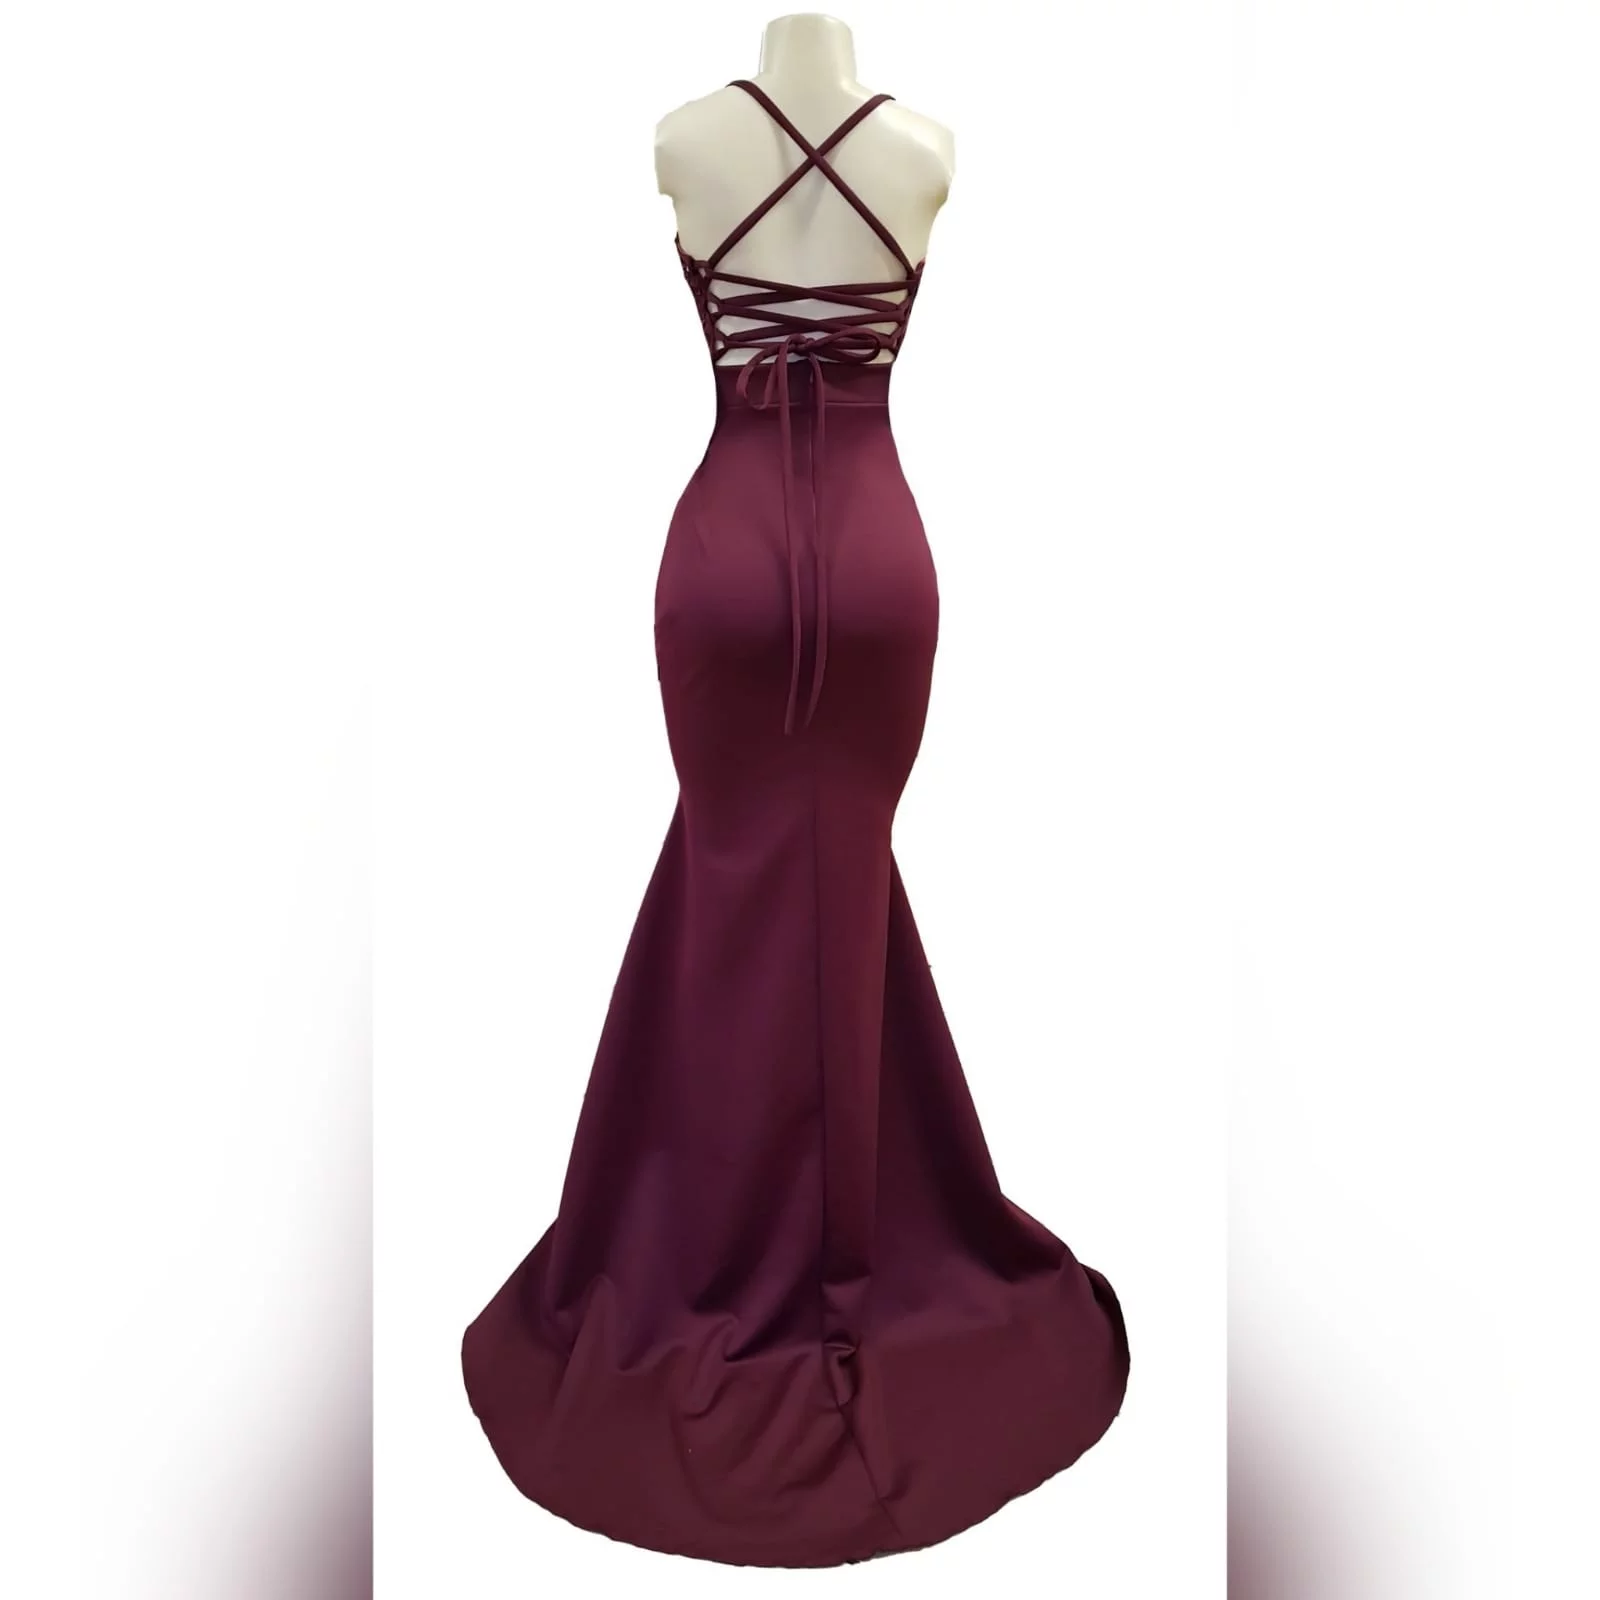 Burgundy soft mermaid plus size prom dress 8 burgundy soft mermaid plus size prom dress. Bodice detailed with lace and silver beads, small triangle opening on the waist with waistband finish. Open laceup back and a train.